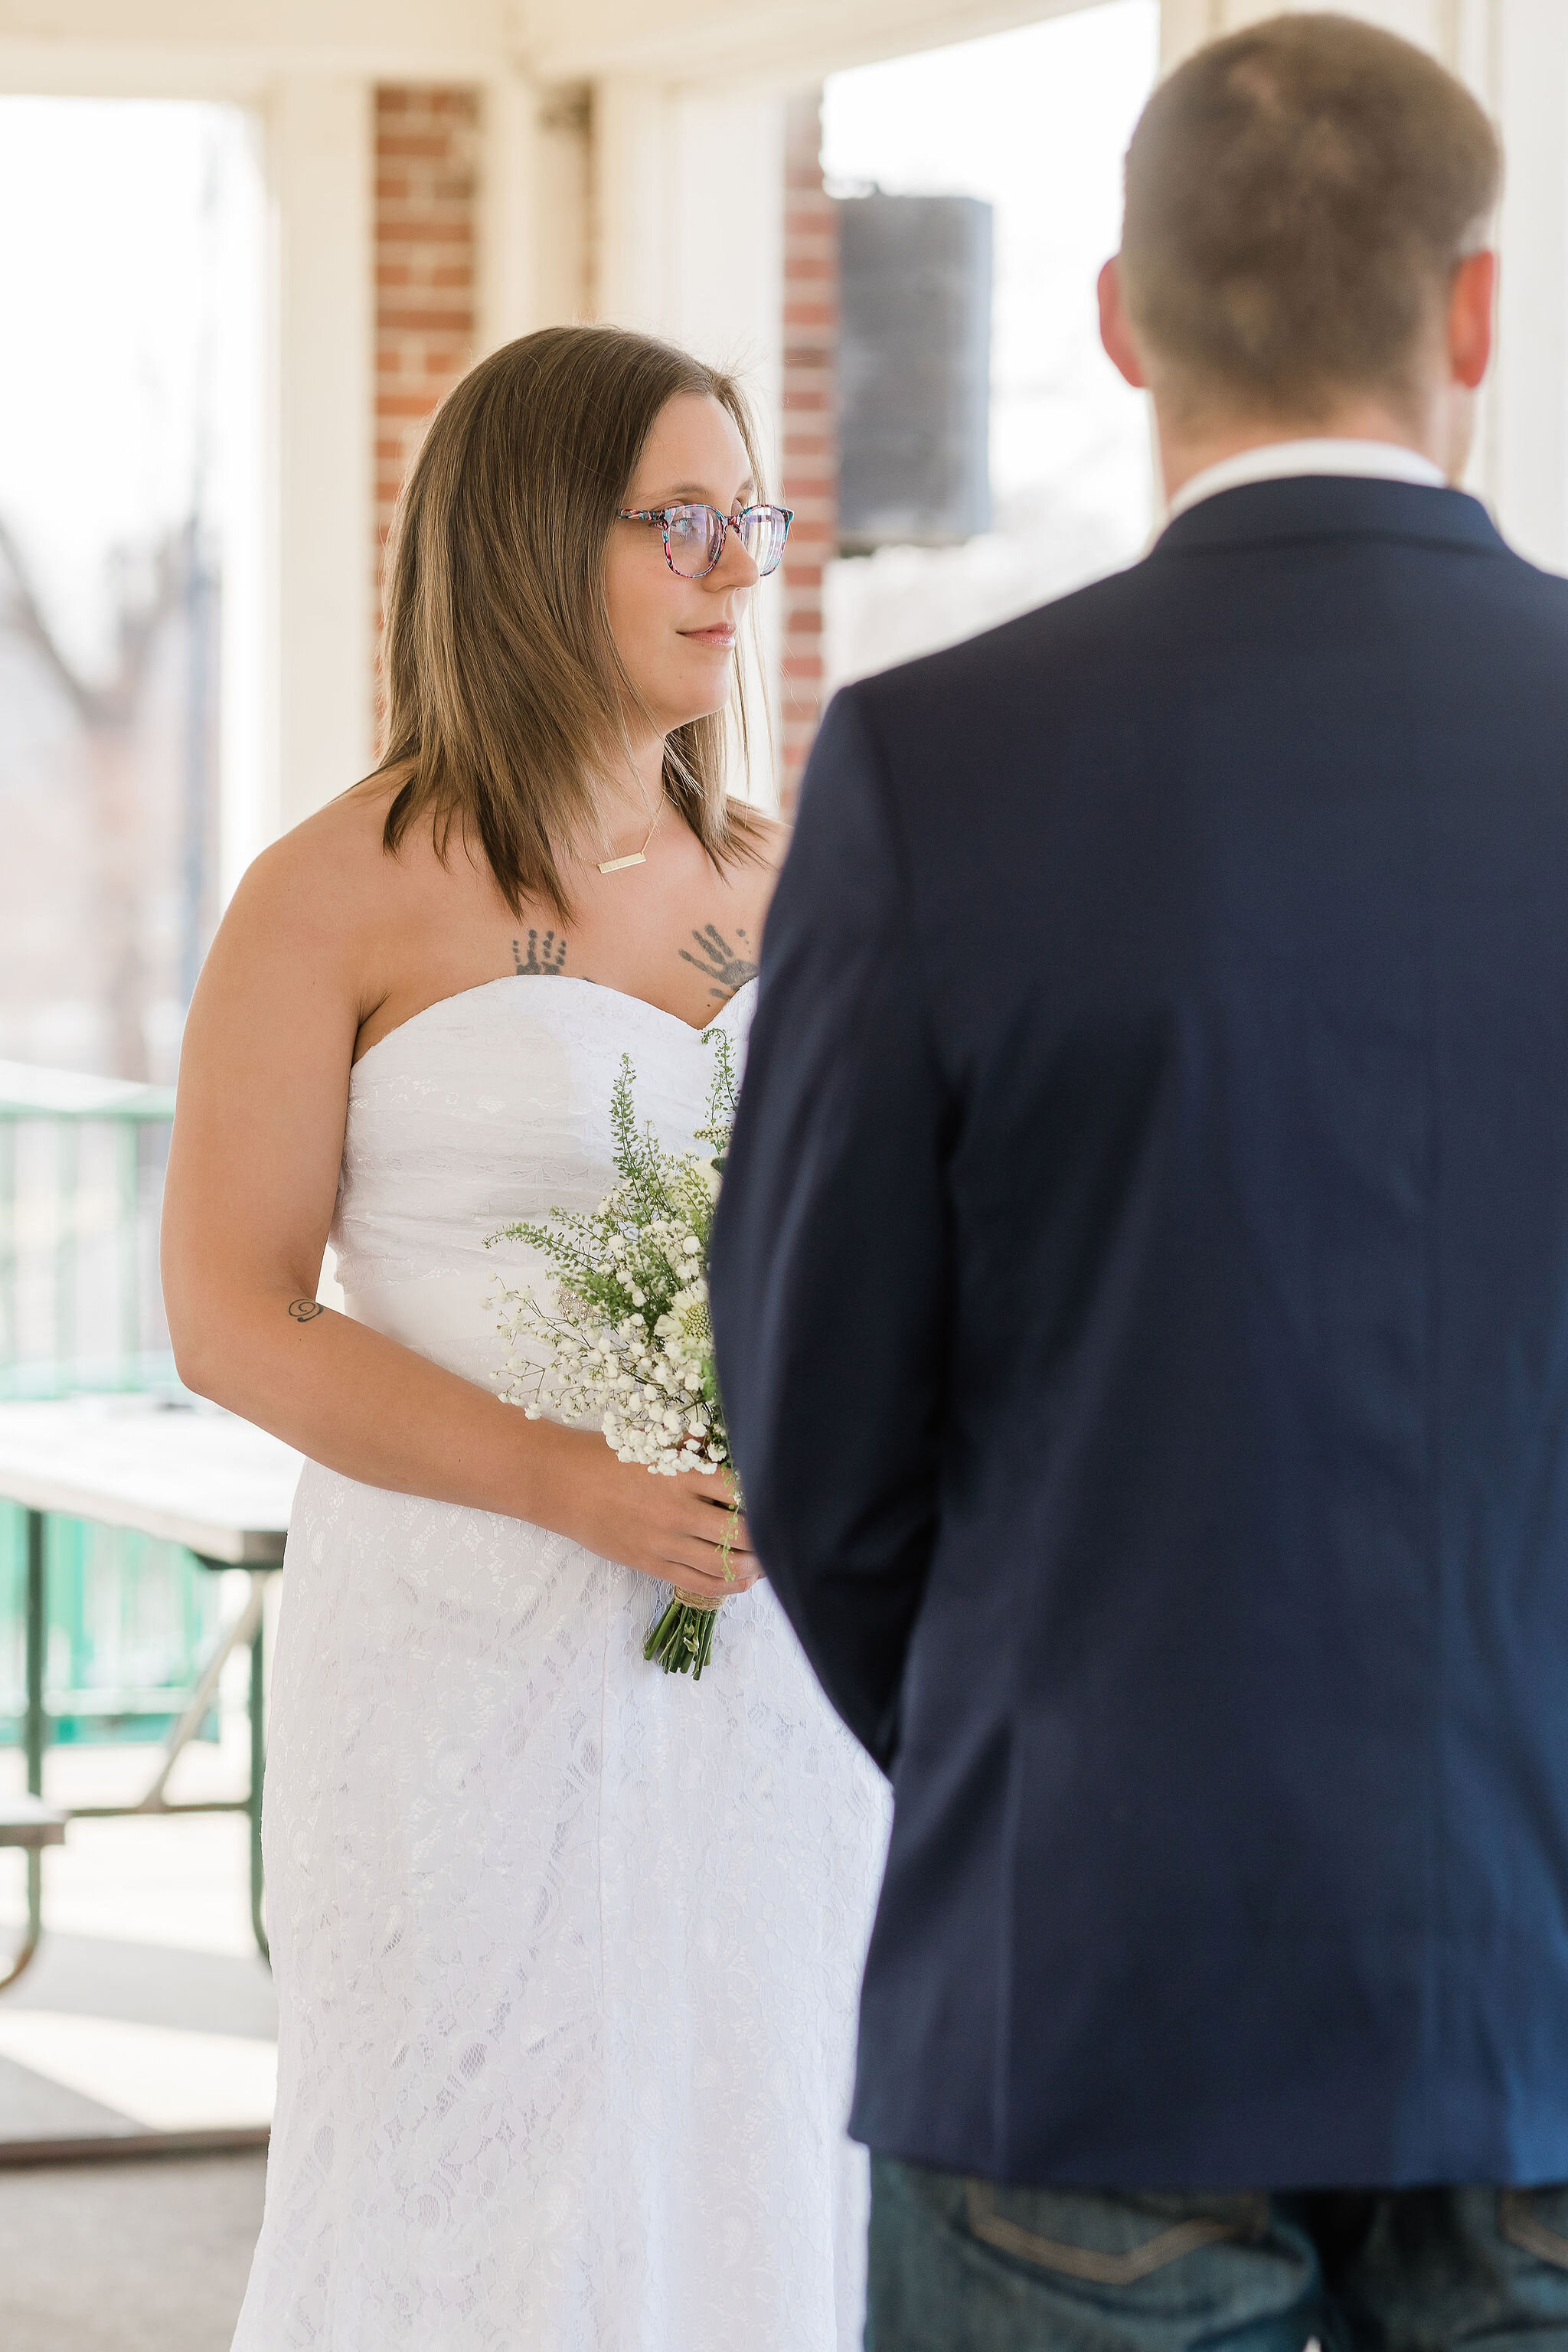 Bride looking at the officiant